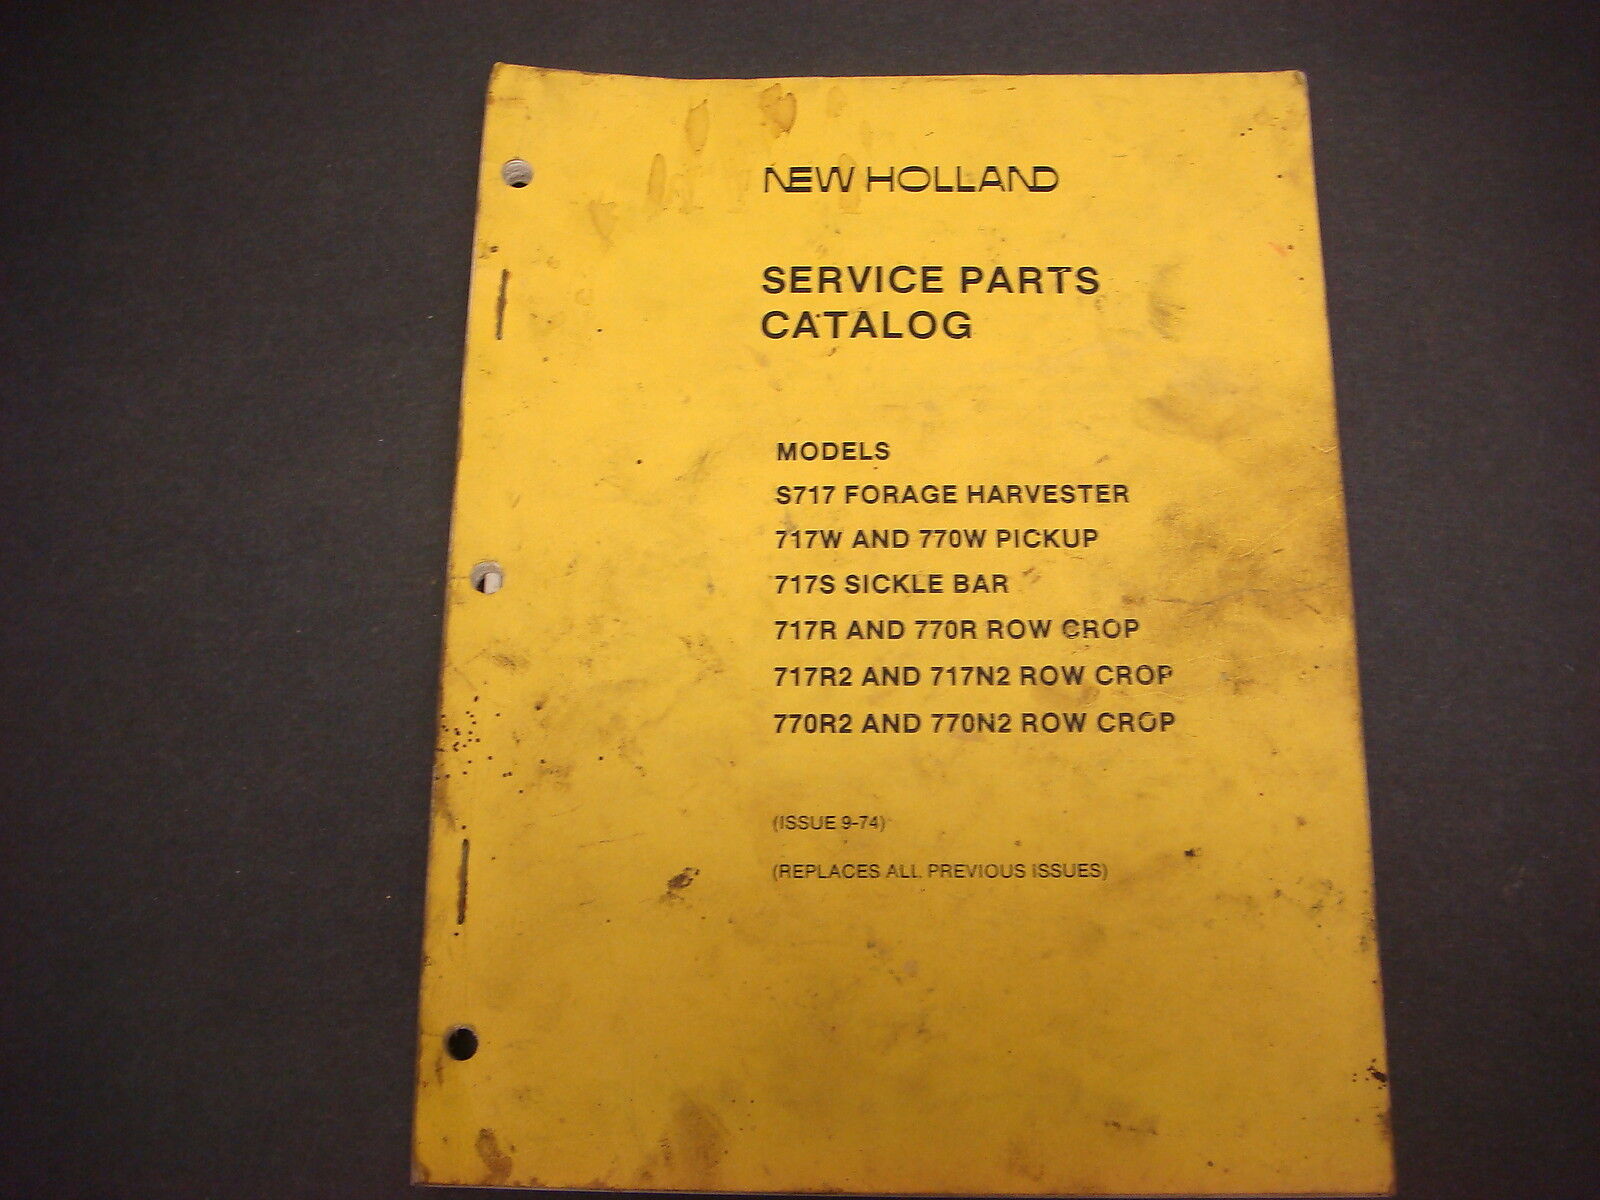 1974 New Holland Service Parts Catalogs 717,717W,770 S, R2 N2,Harvester,Row Crop